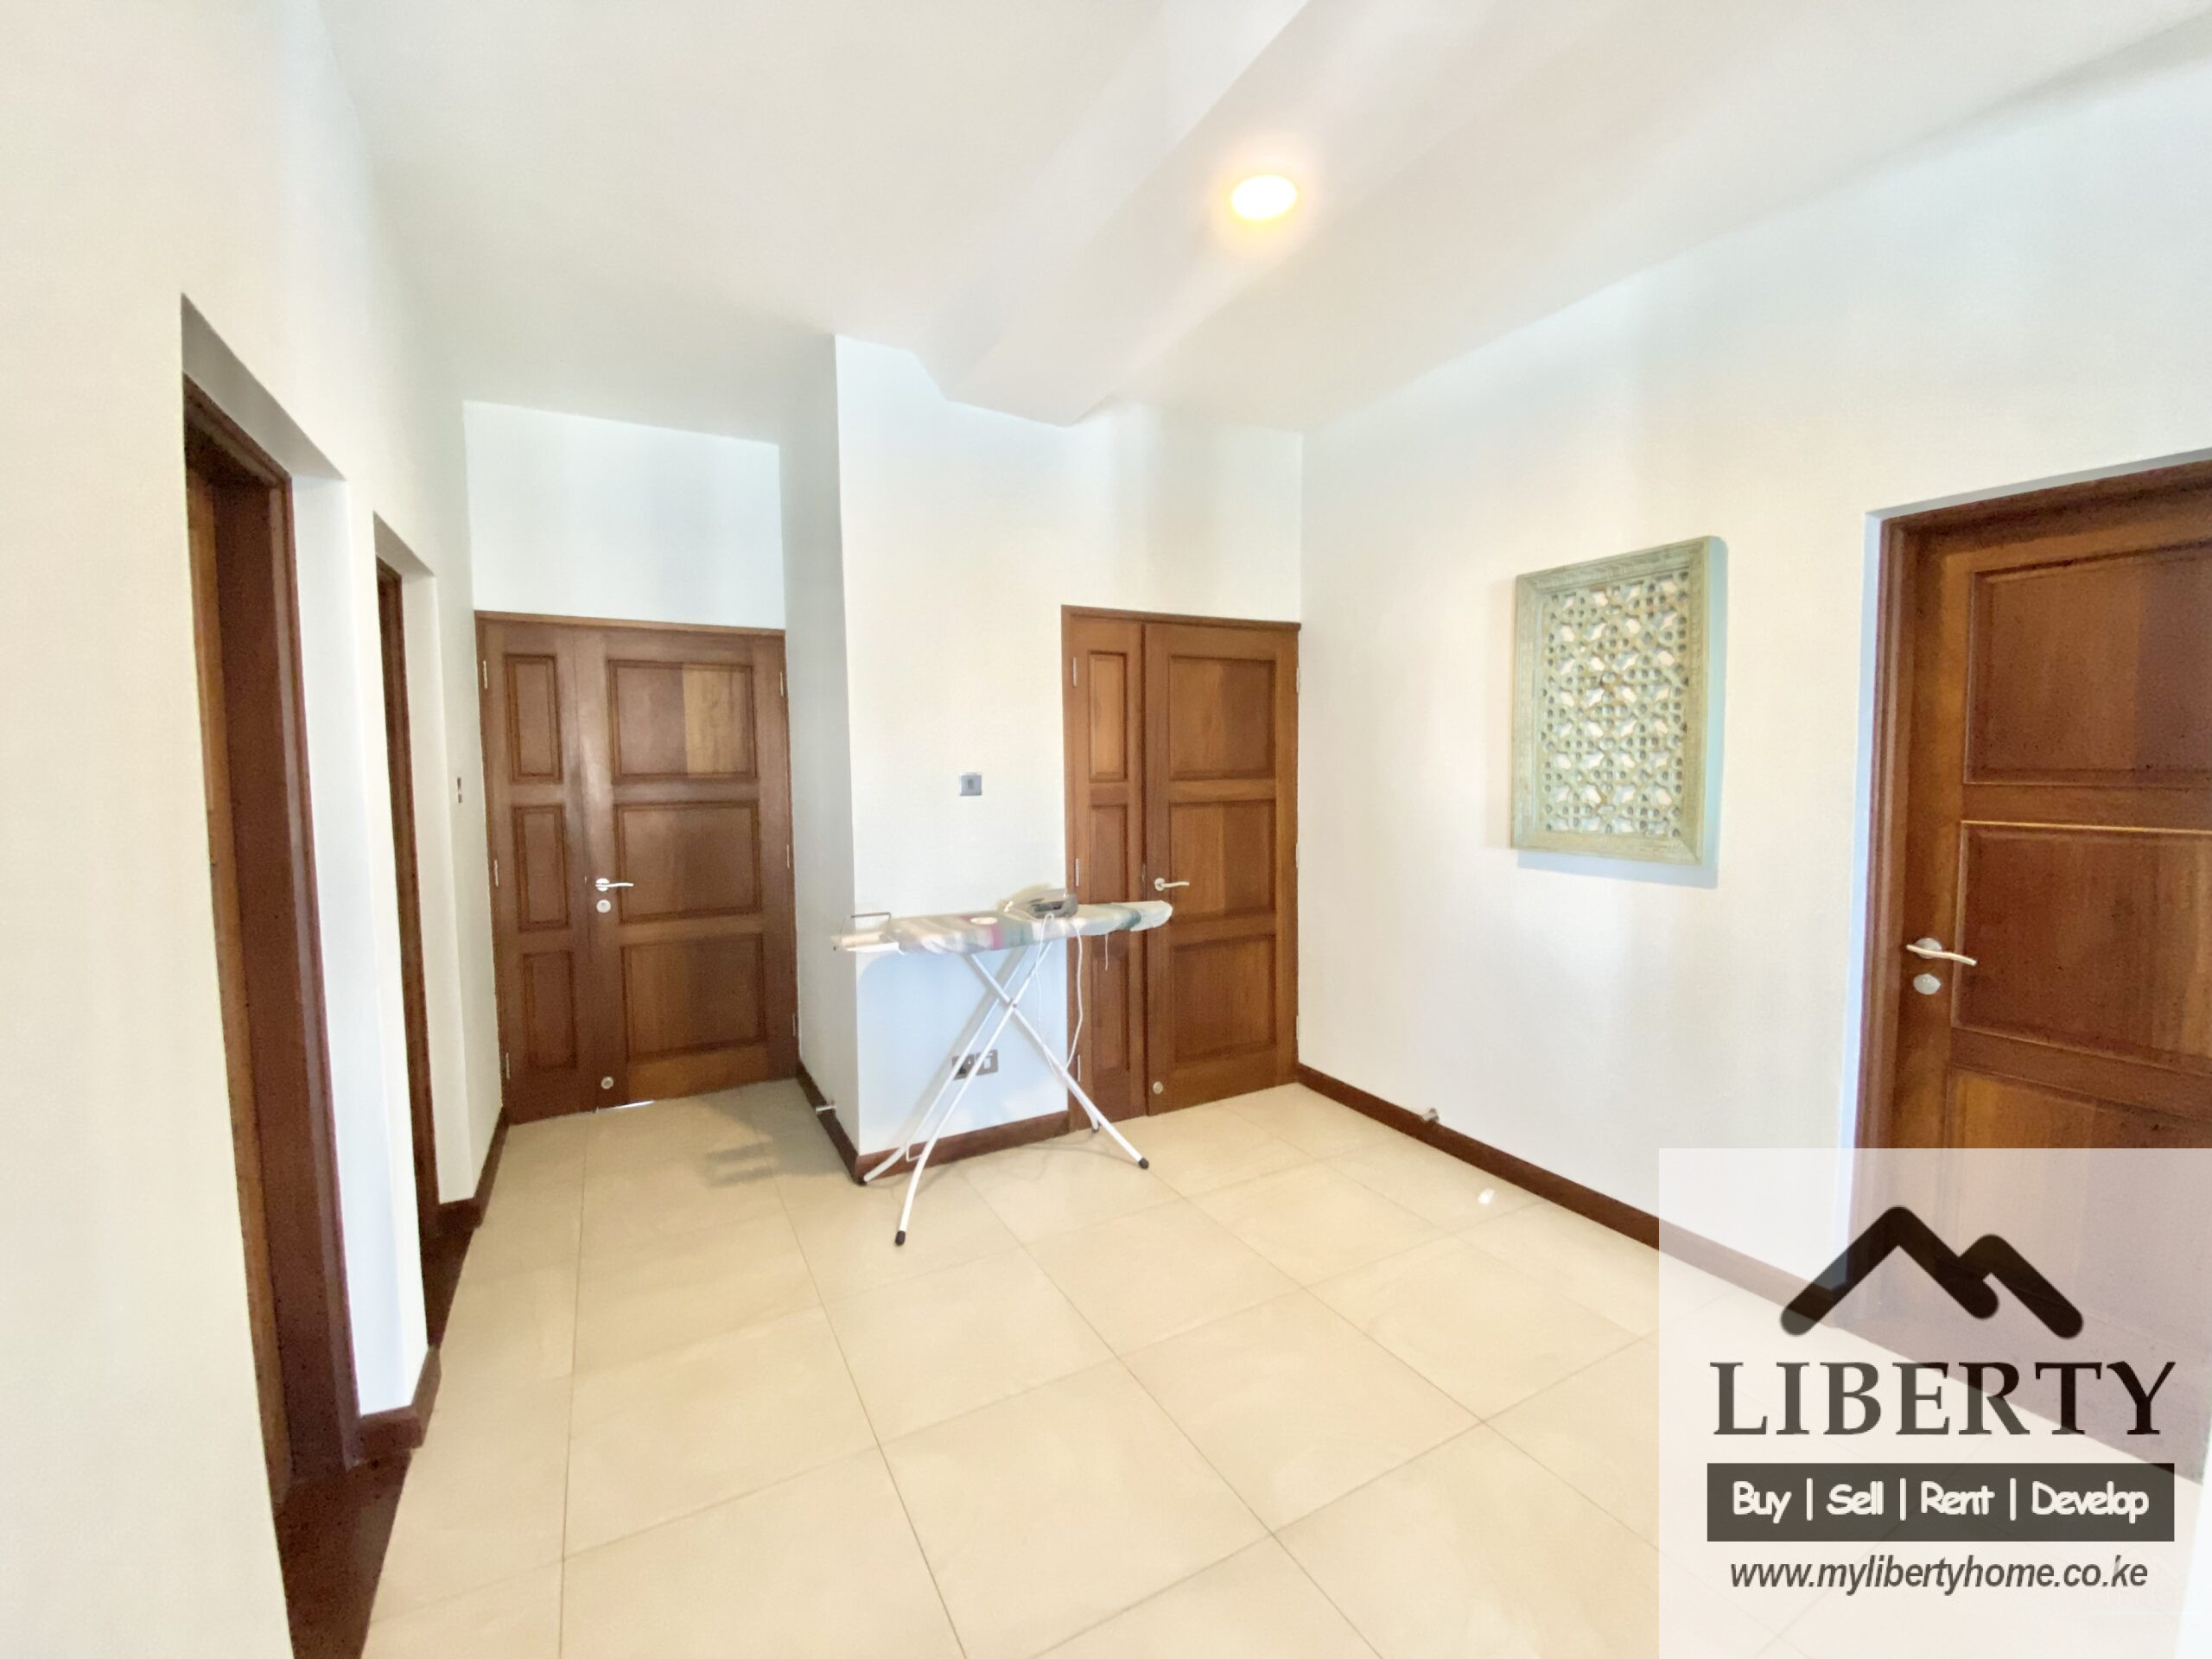 Exclusive Ocean View 2 Bedroom Furnished Apartment In Mombasa-Nyali For Rent-250K- Ref-779